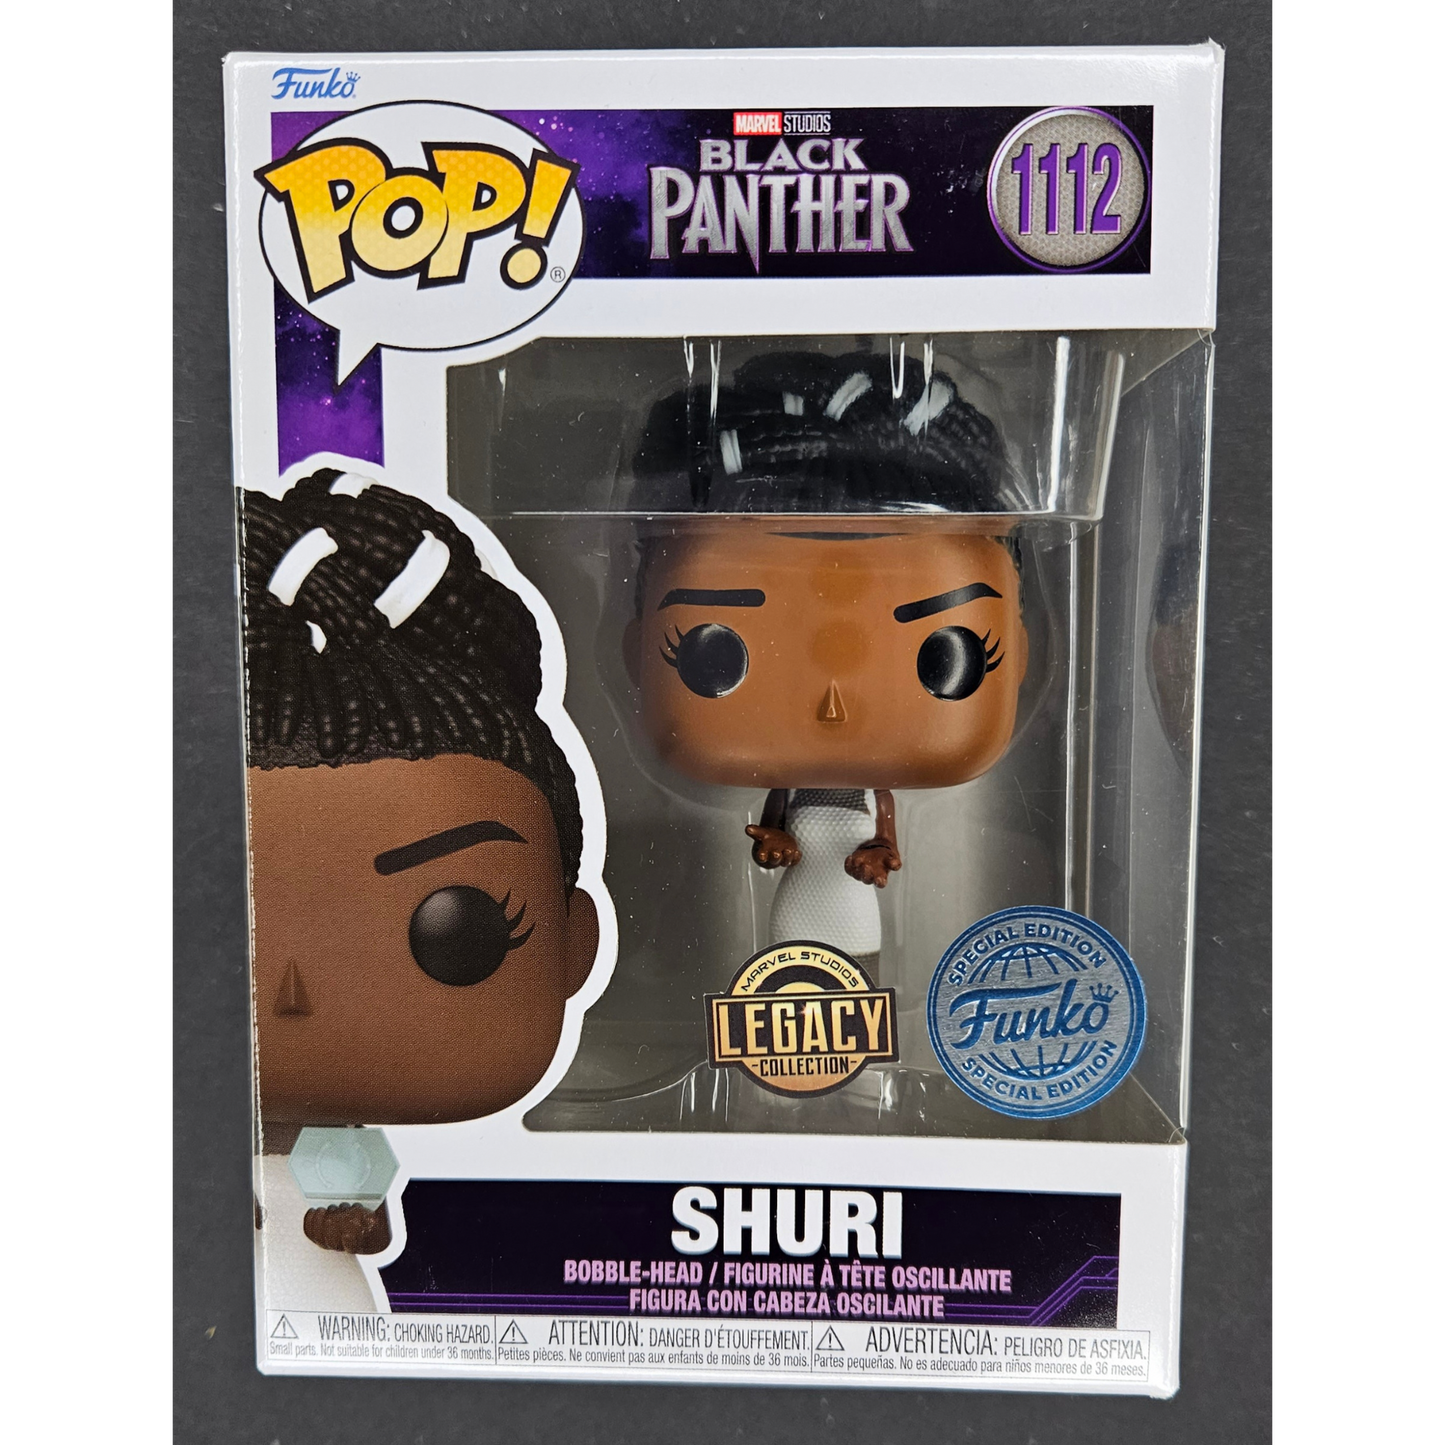 Shuri Funko Pop! Panther #1112 Special Edition Marvel Studios Legacy Edition